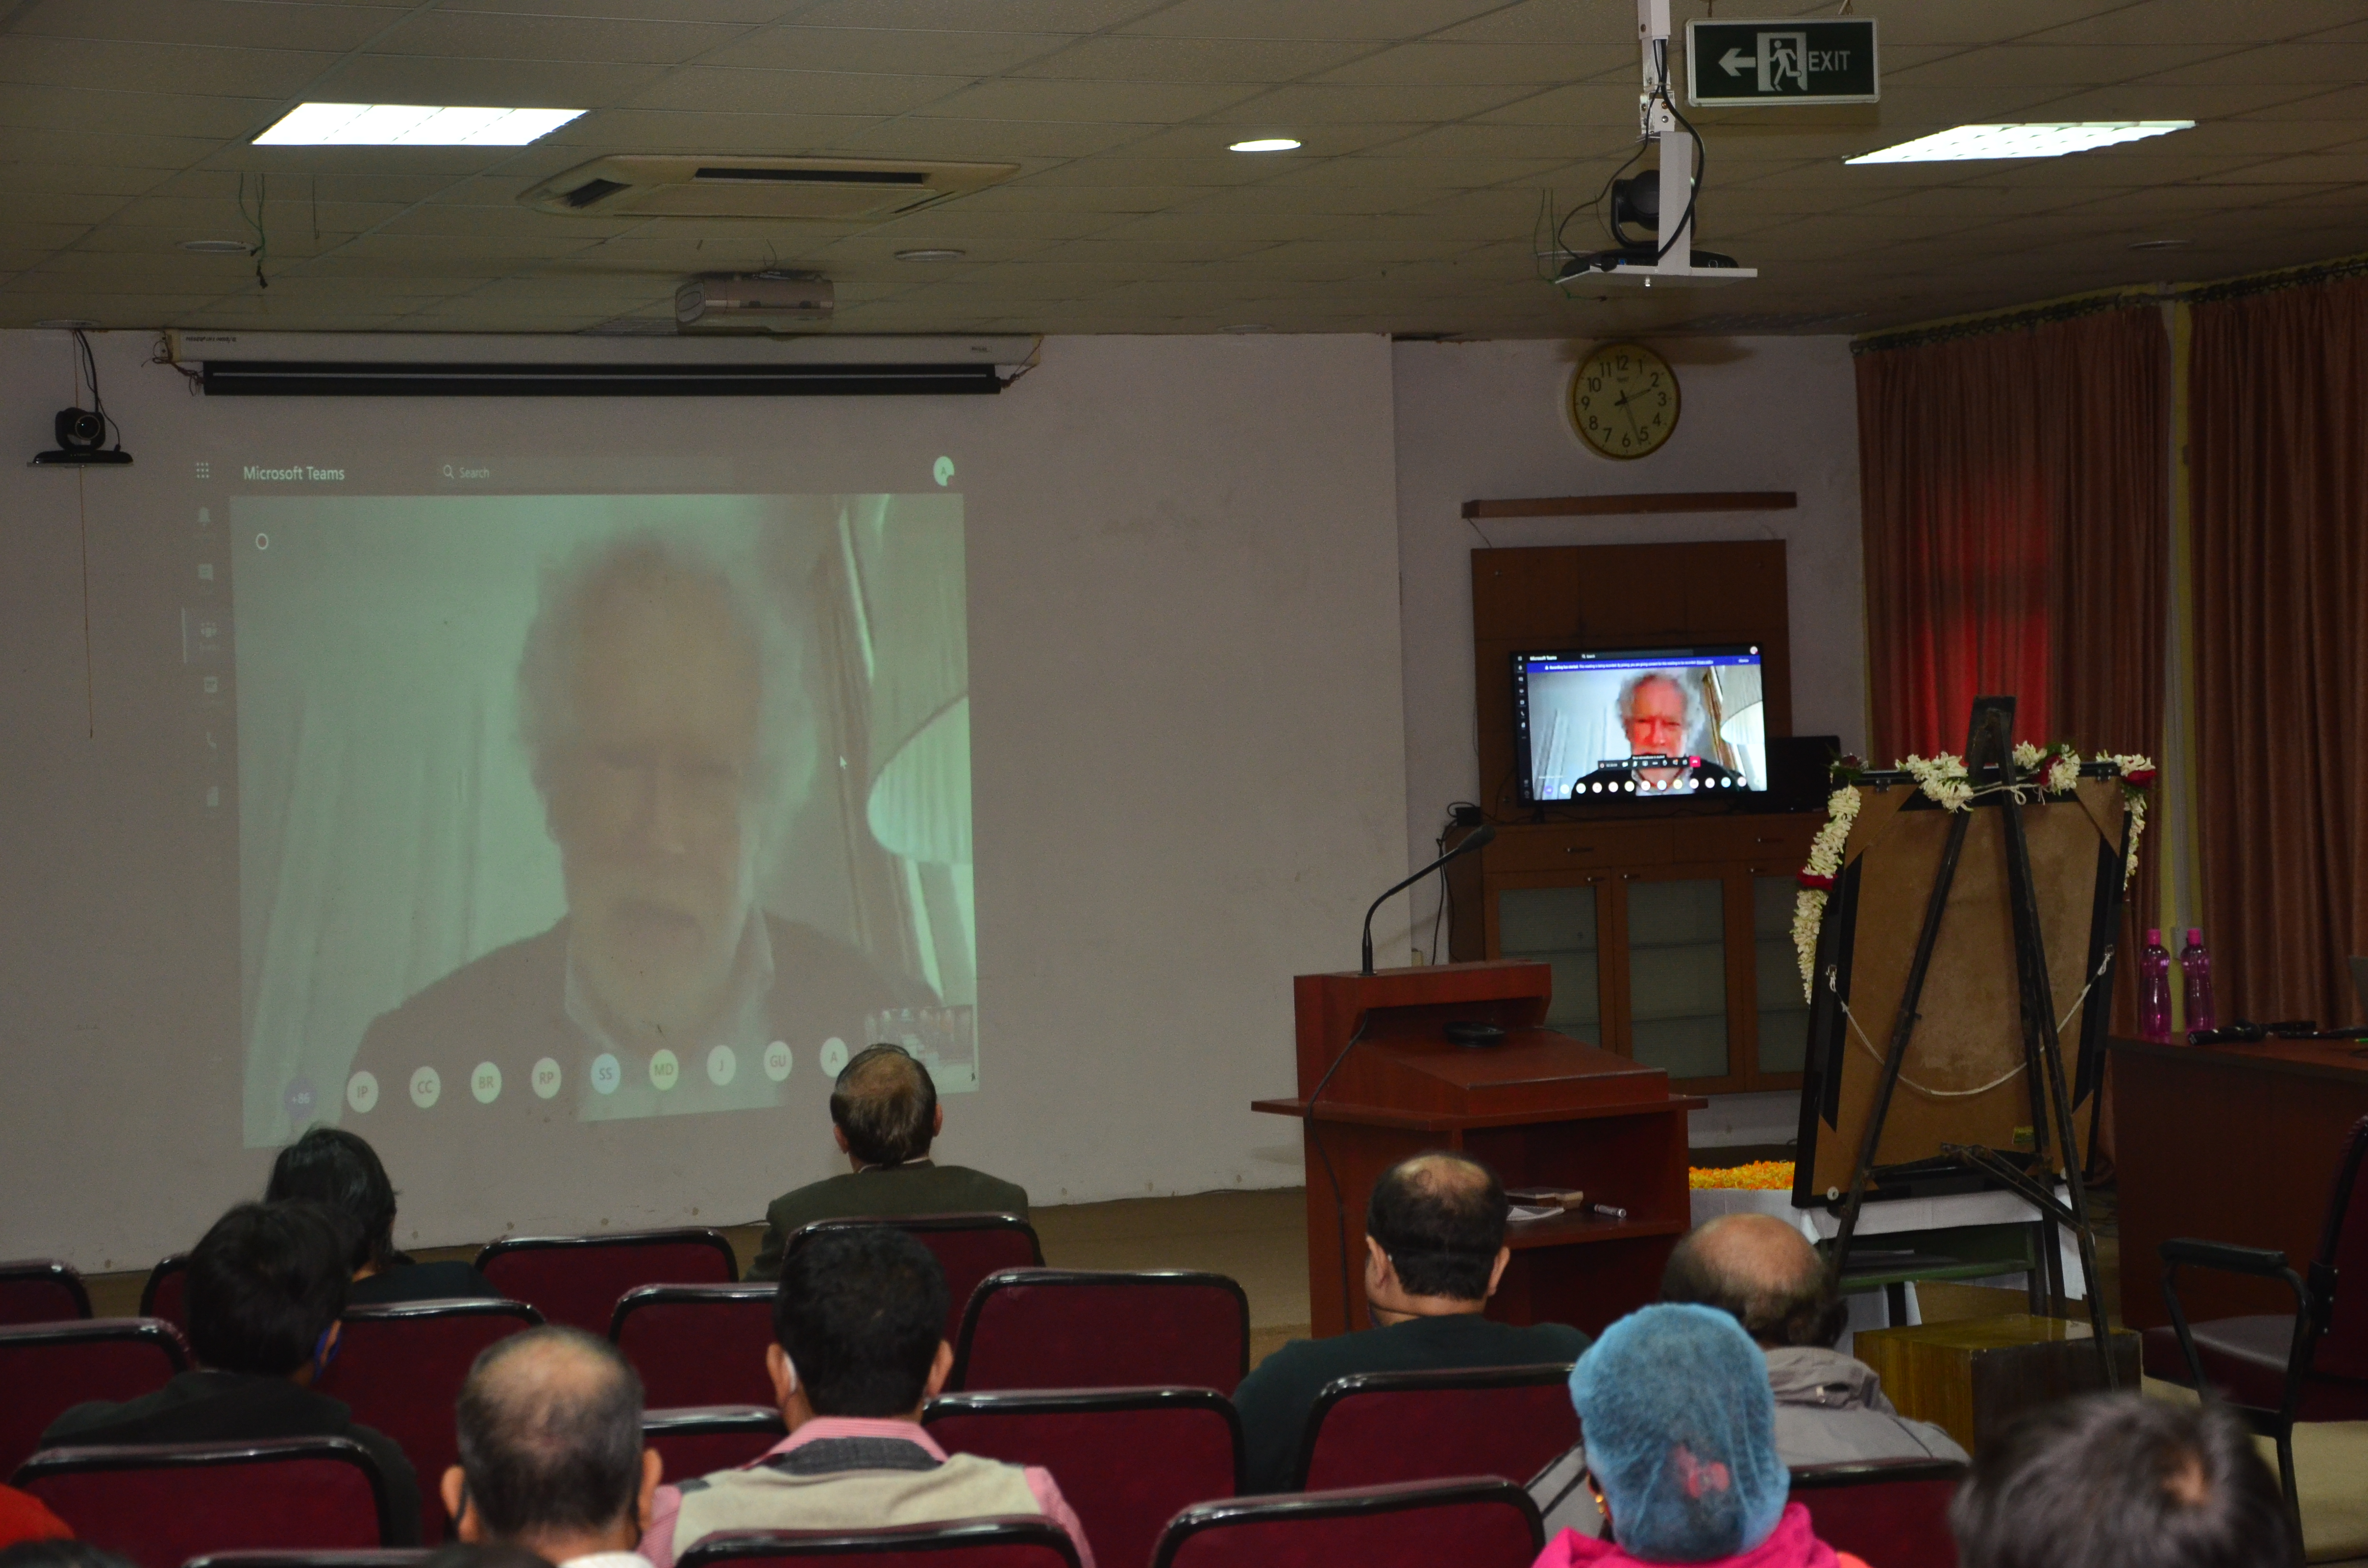 Celebration of 128th Birth Anniversary of Satyendranath Bose & 25th S.N Bose Memorial Lecture by Prof. Anton Zeilinger